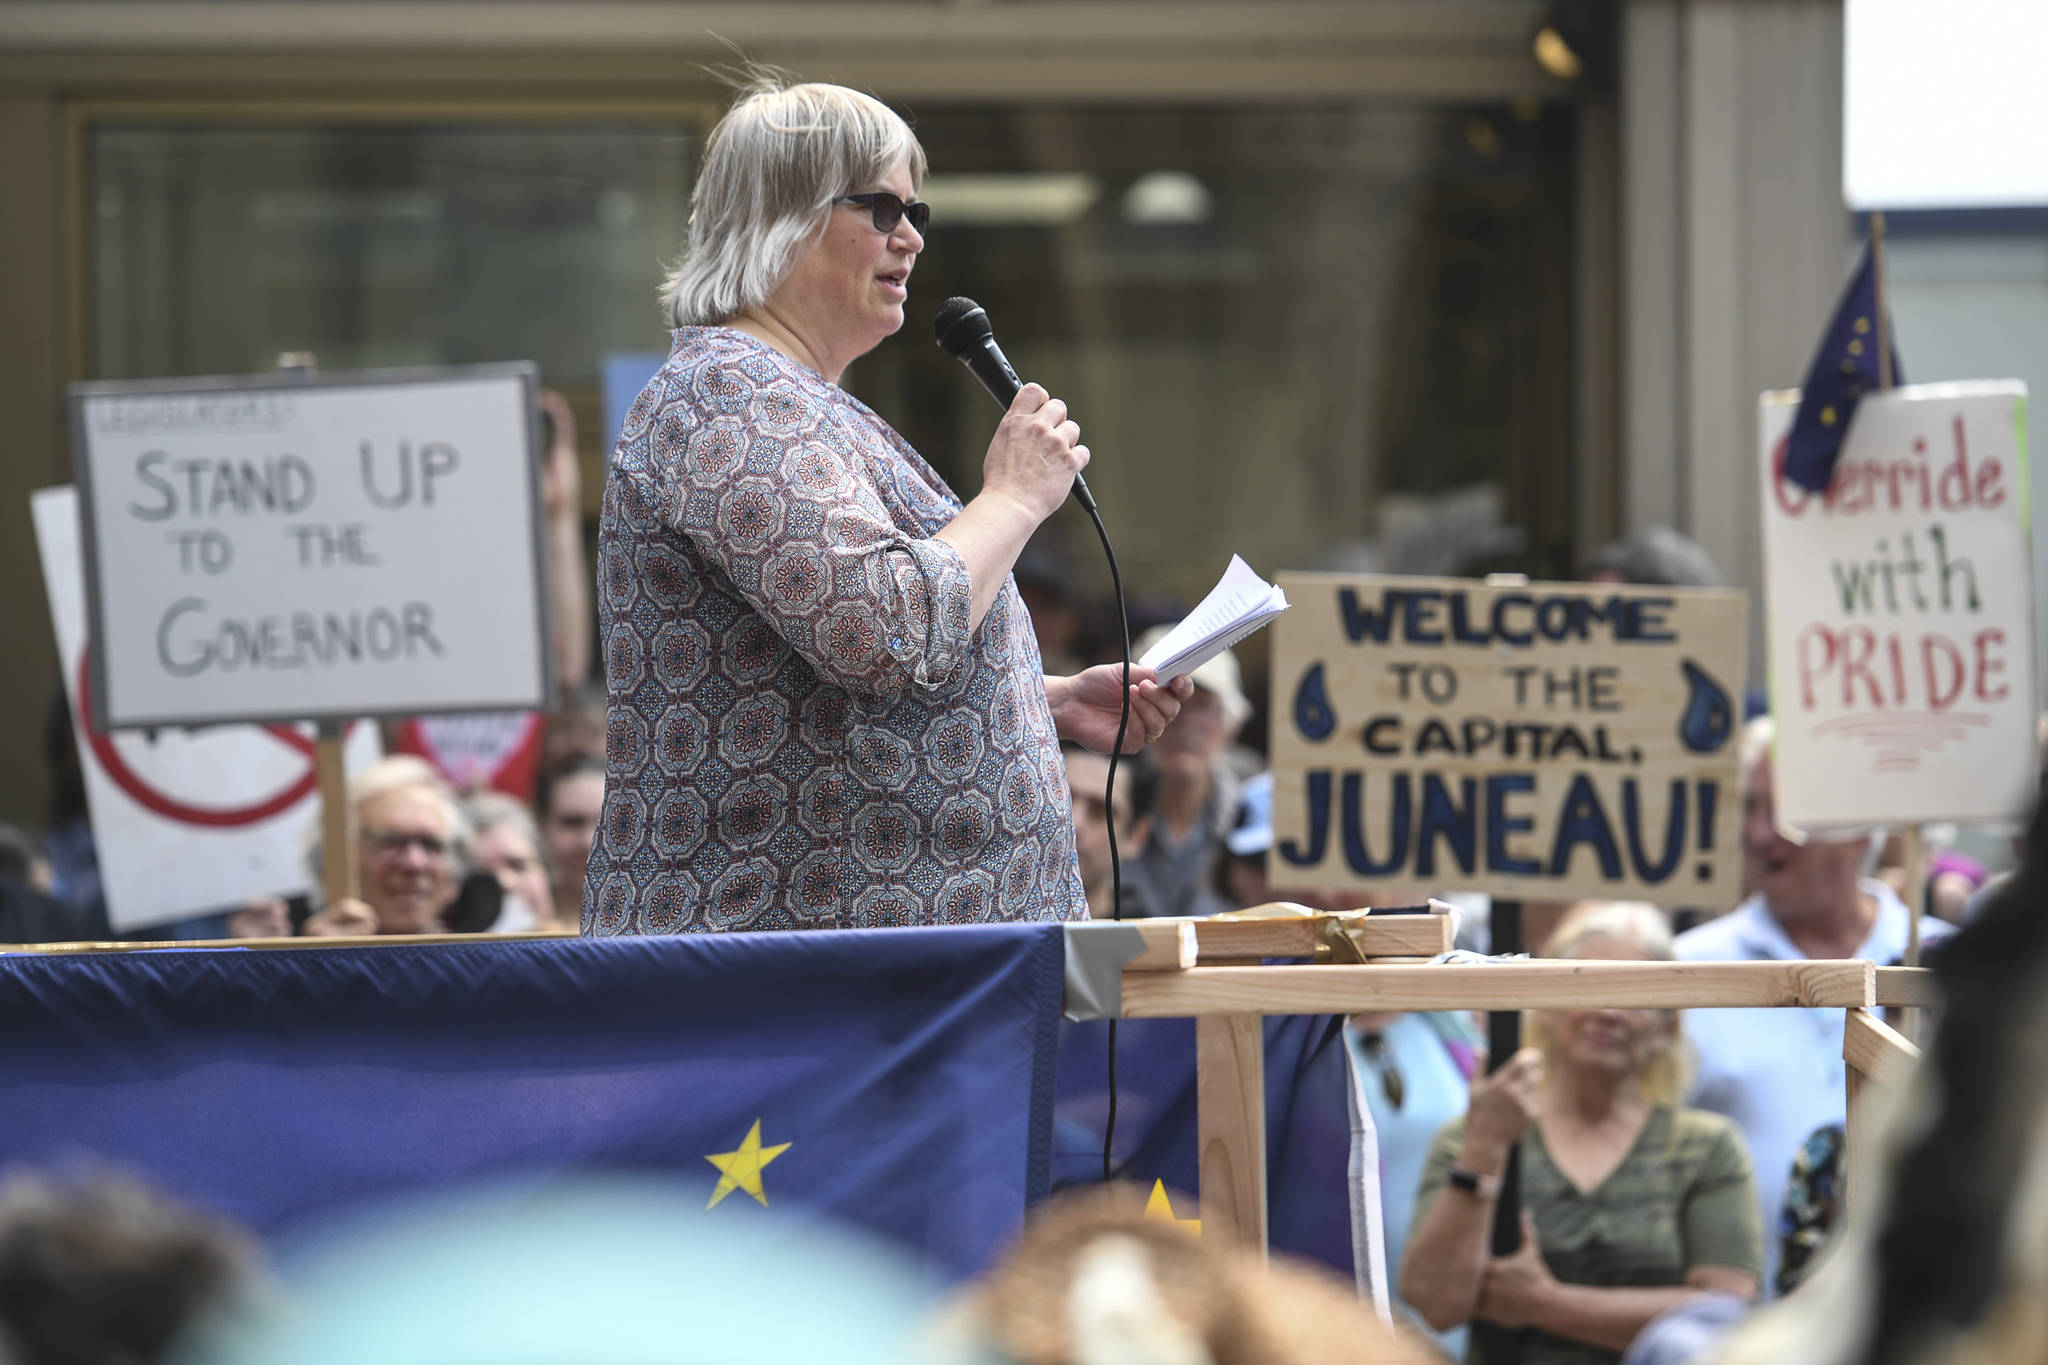 Hundreds attend a rally in front of the Capitol calling for an override of Gov. Mike Dunleavy’s budget vetos on the first day of the Second Special Session of the Alaska Legislature in Juneau on Monday, July 8, 2019. (Michael Penn | Juneau Empire)